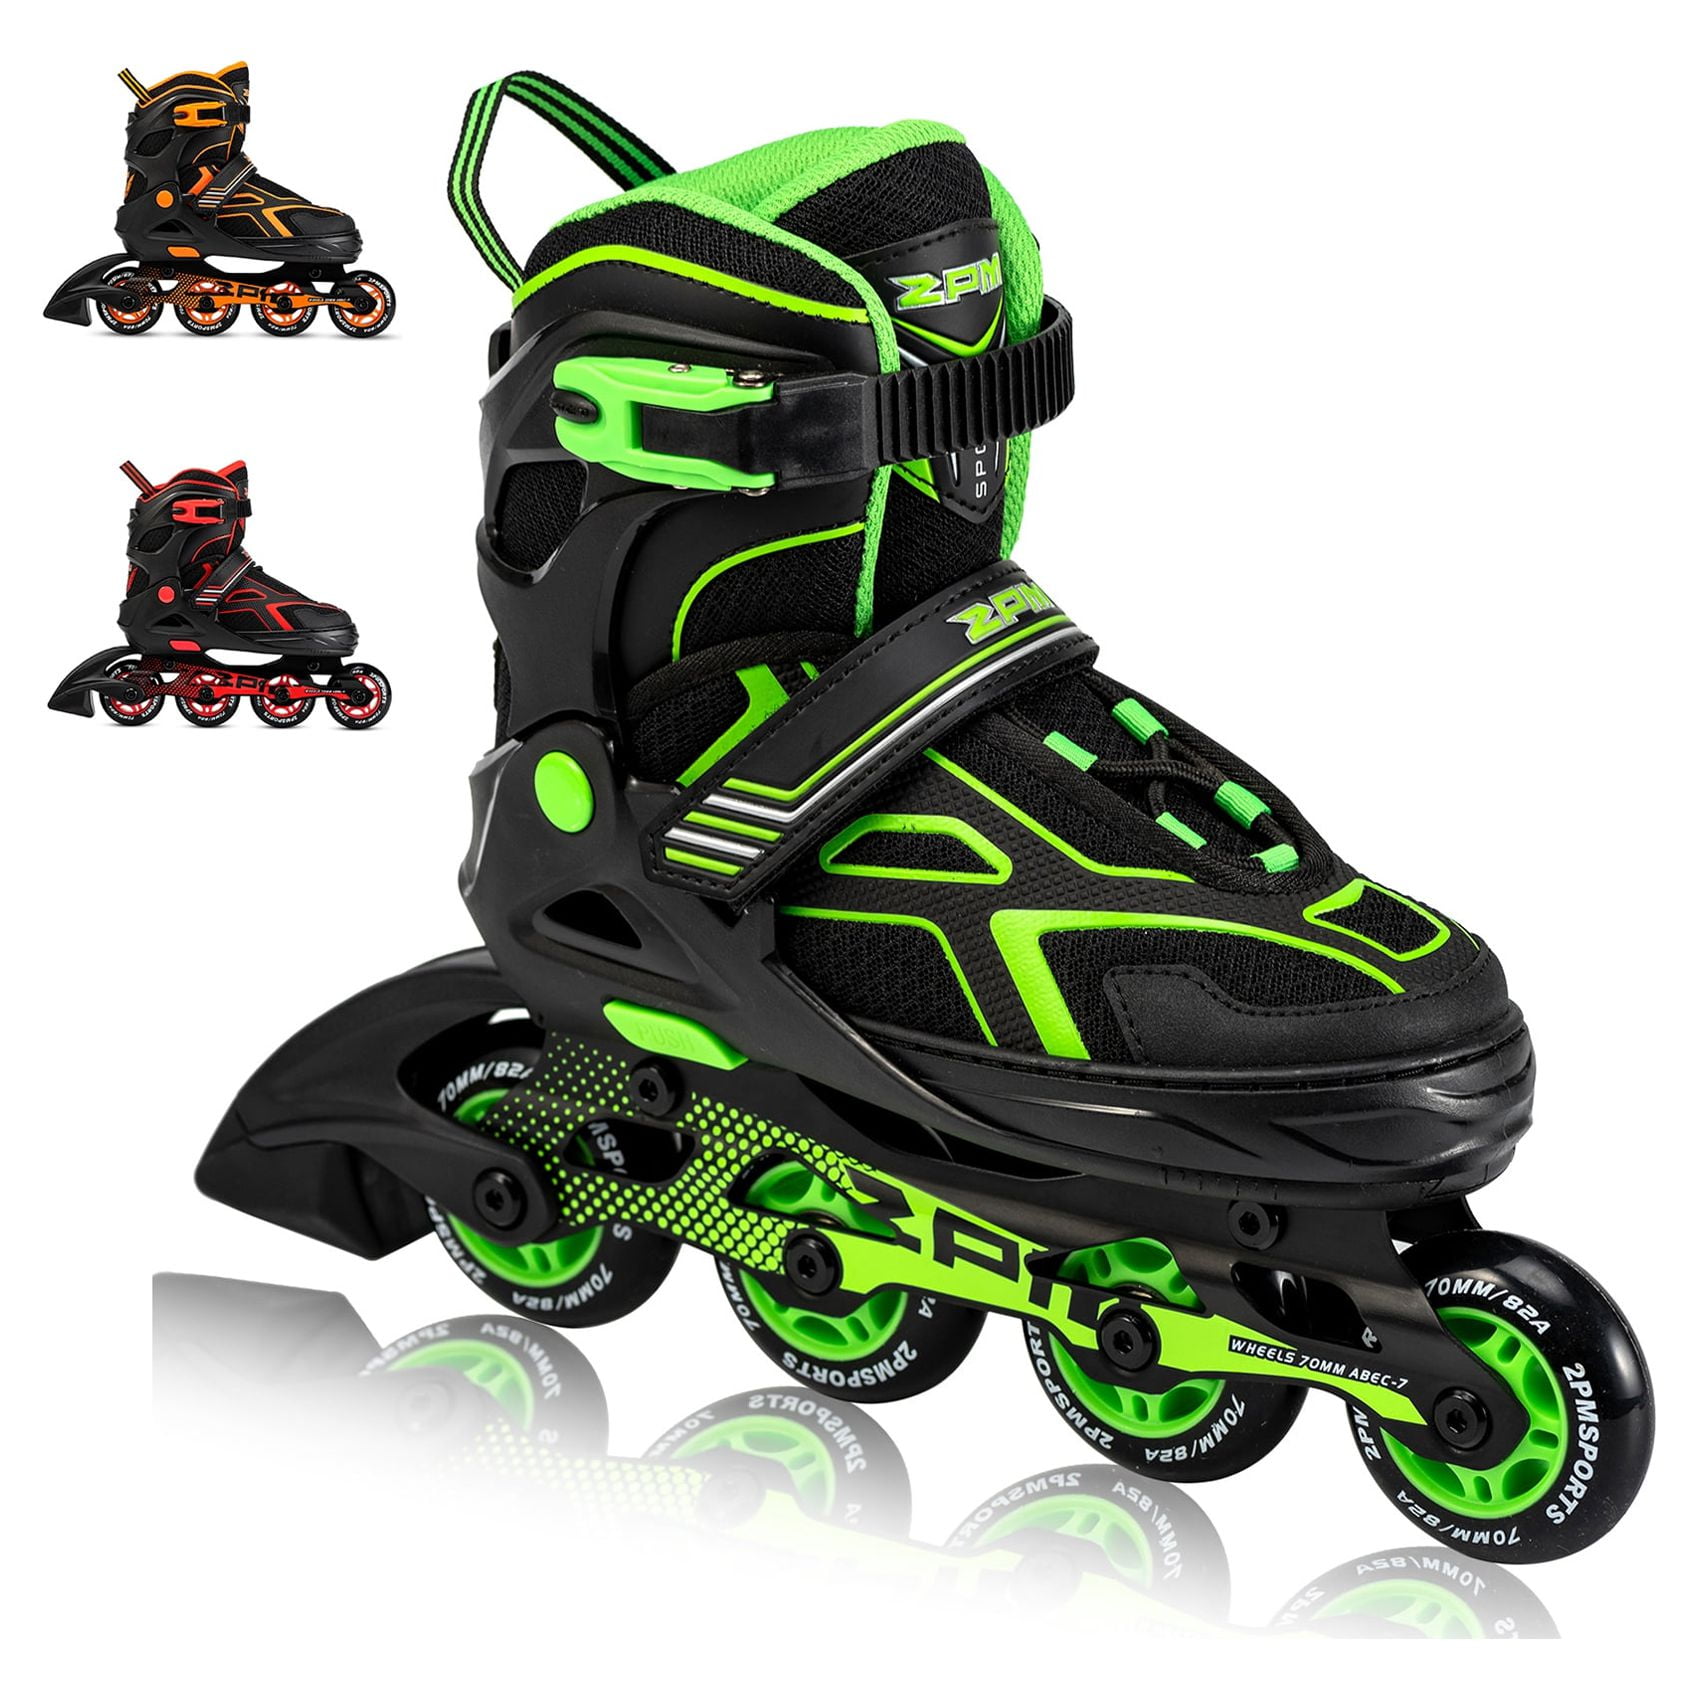 Roller skates 4 roues Derby Quad American Jogger